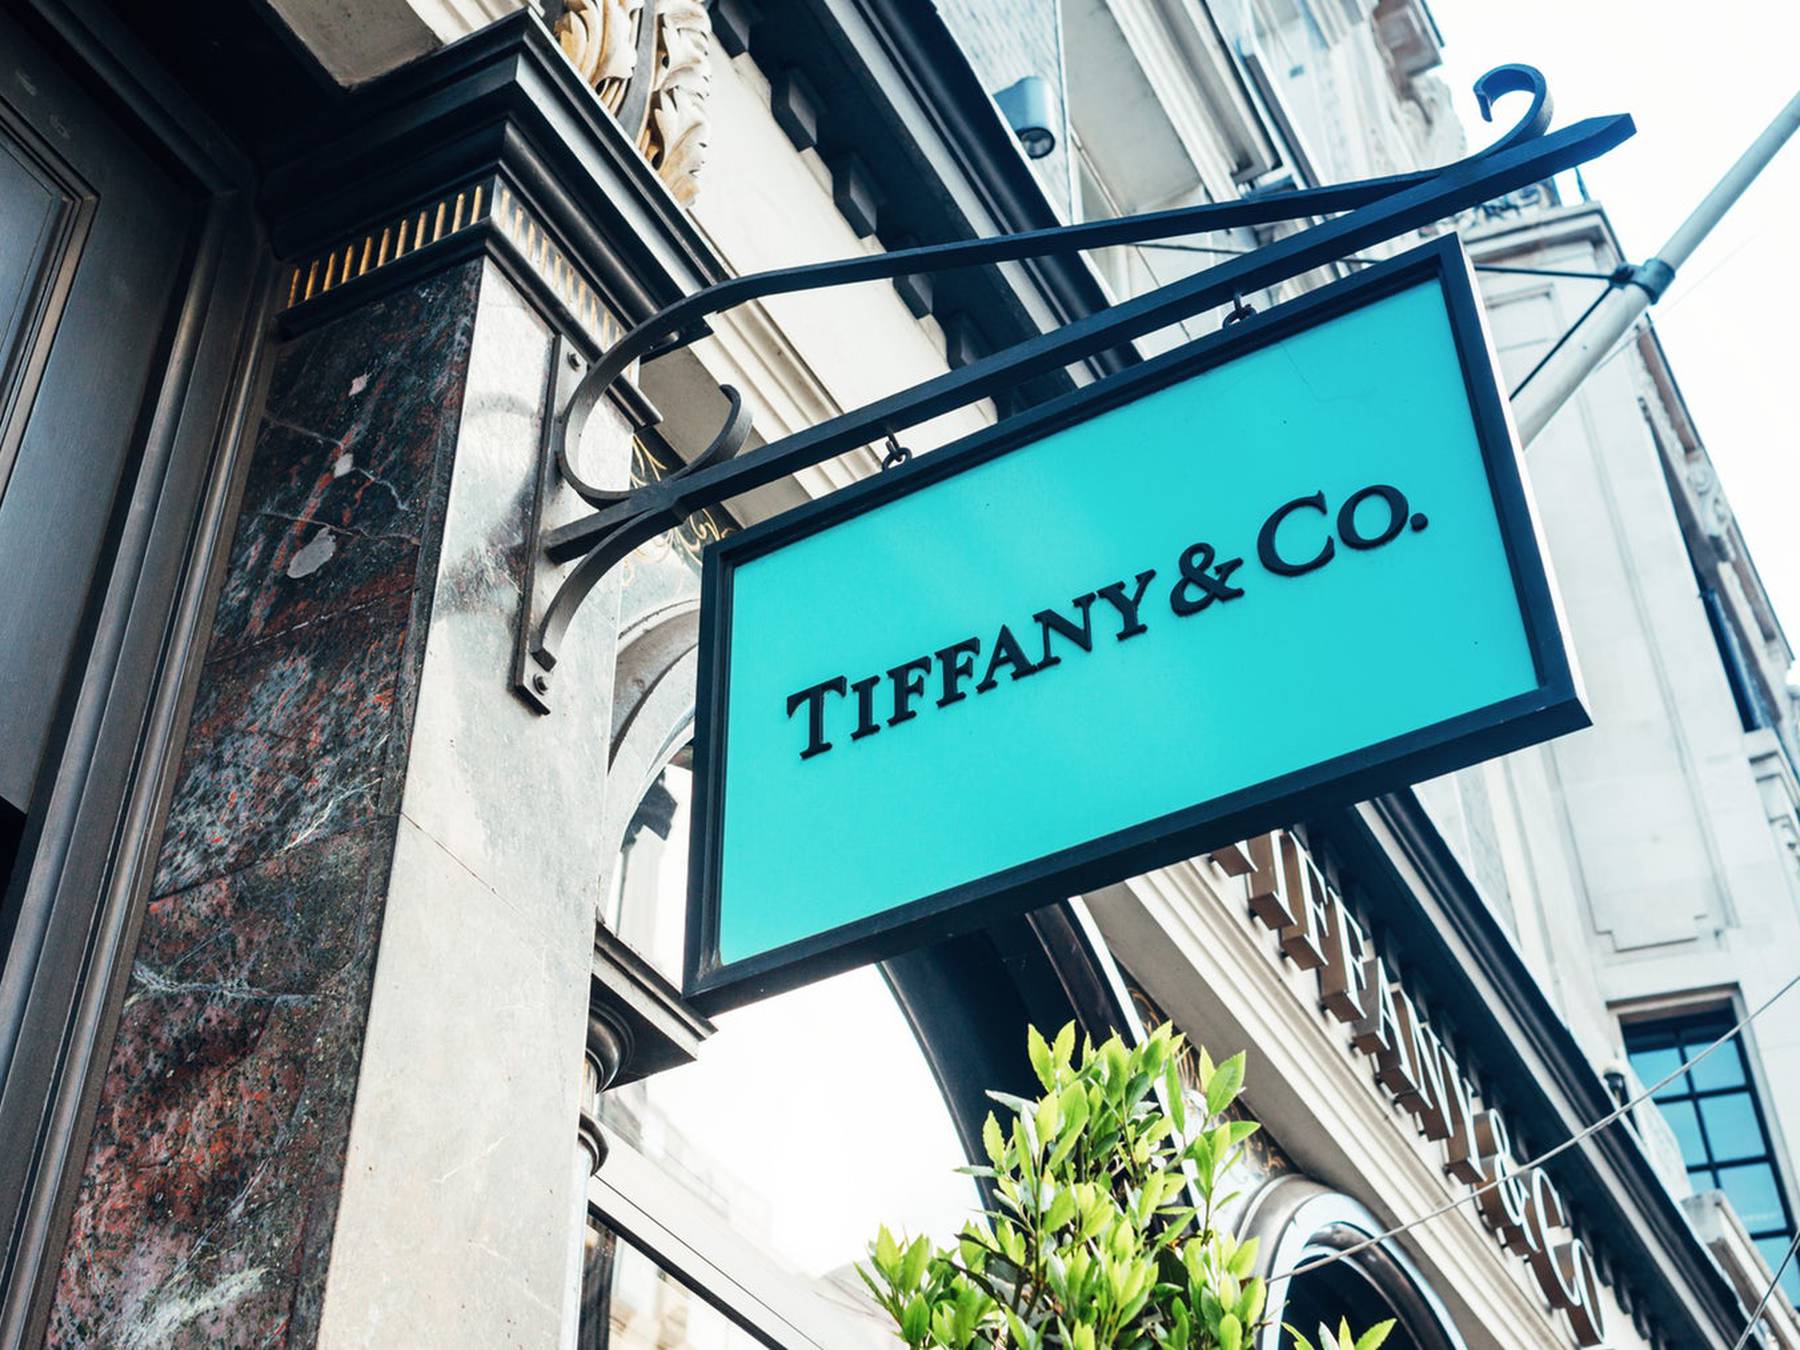 US luxury goods giant Tiffany sues LVMH for reneging on $16